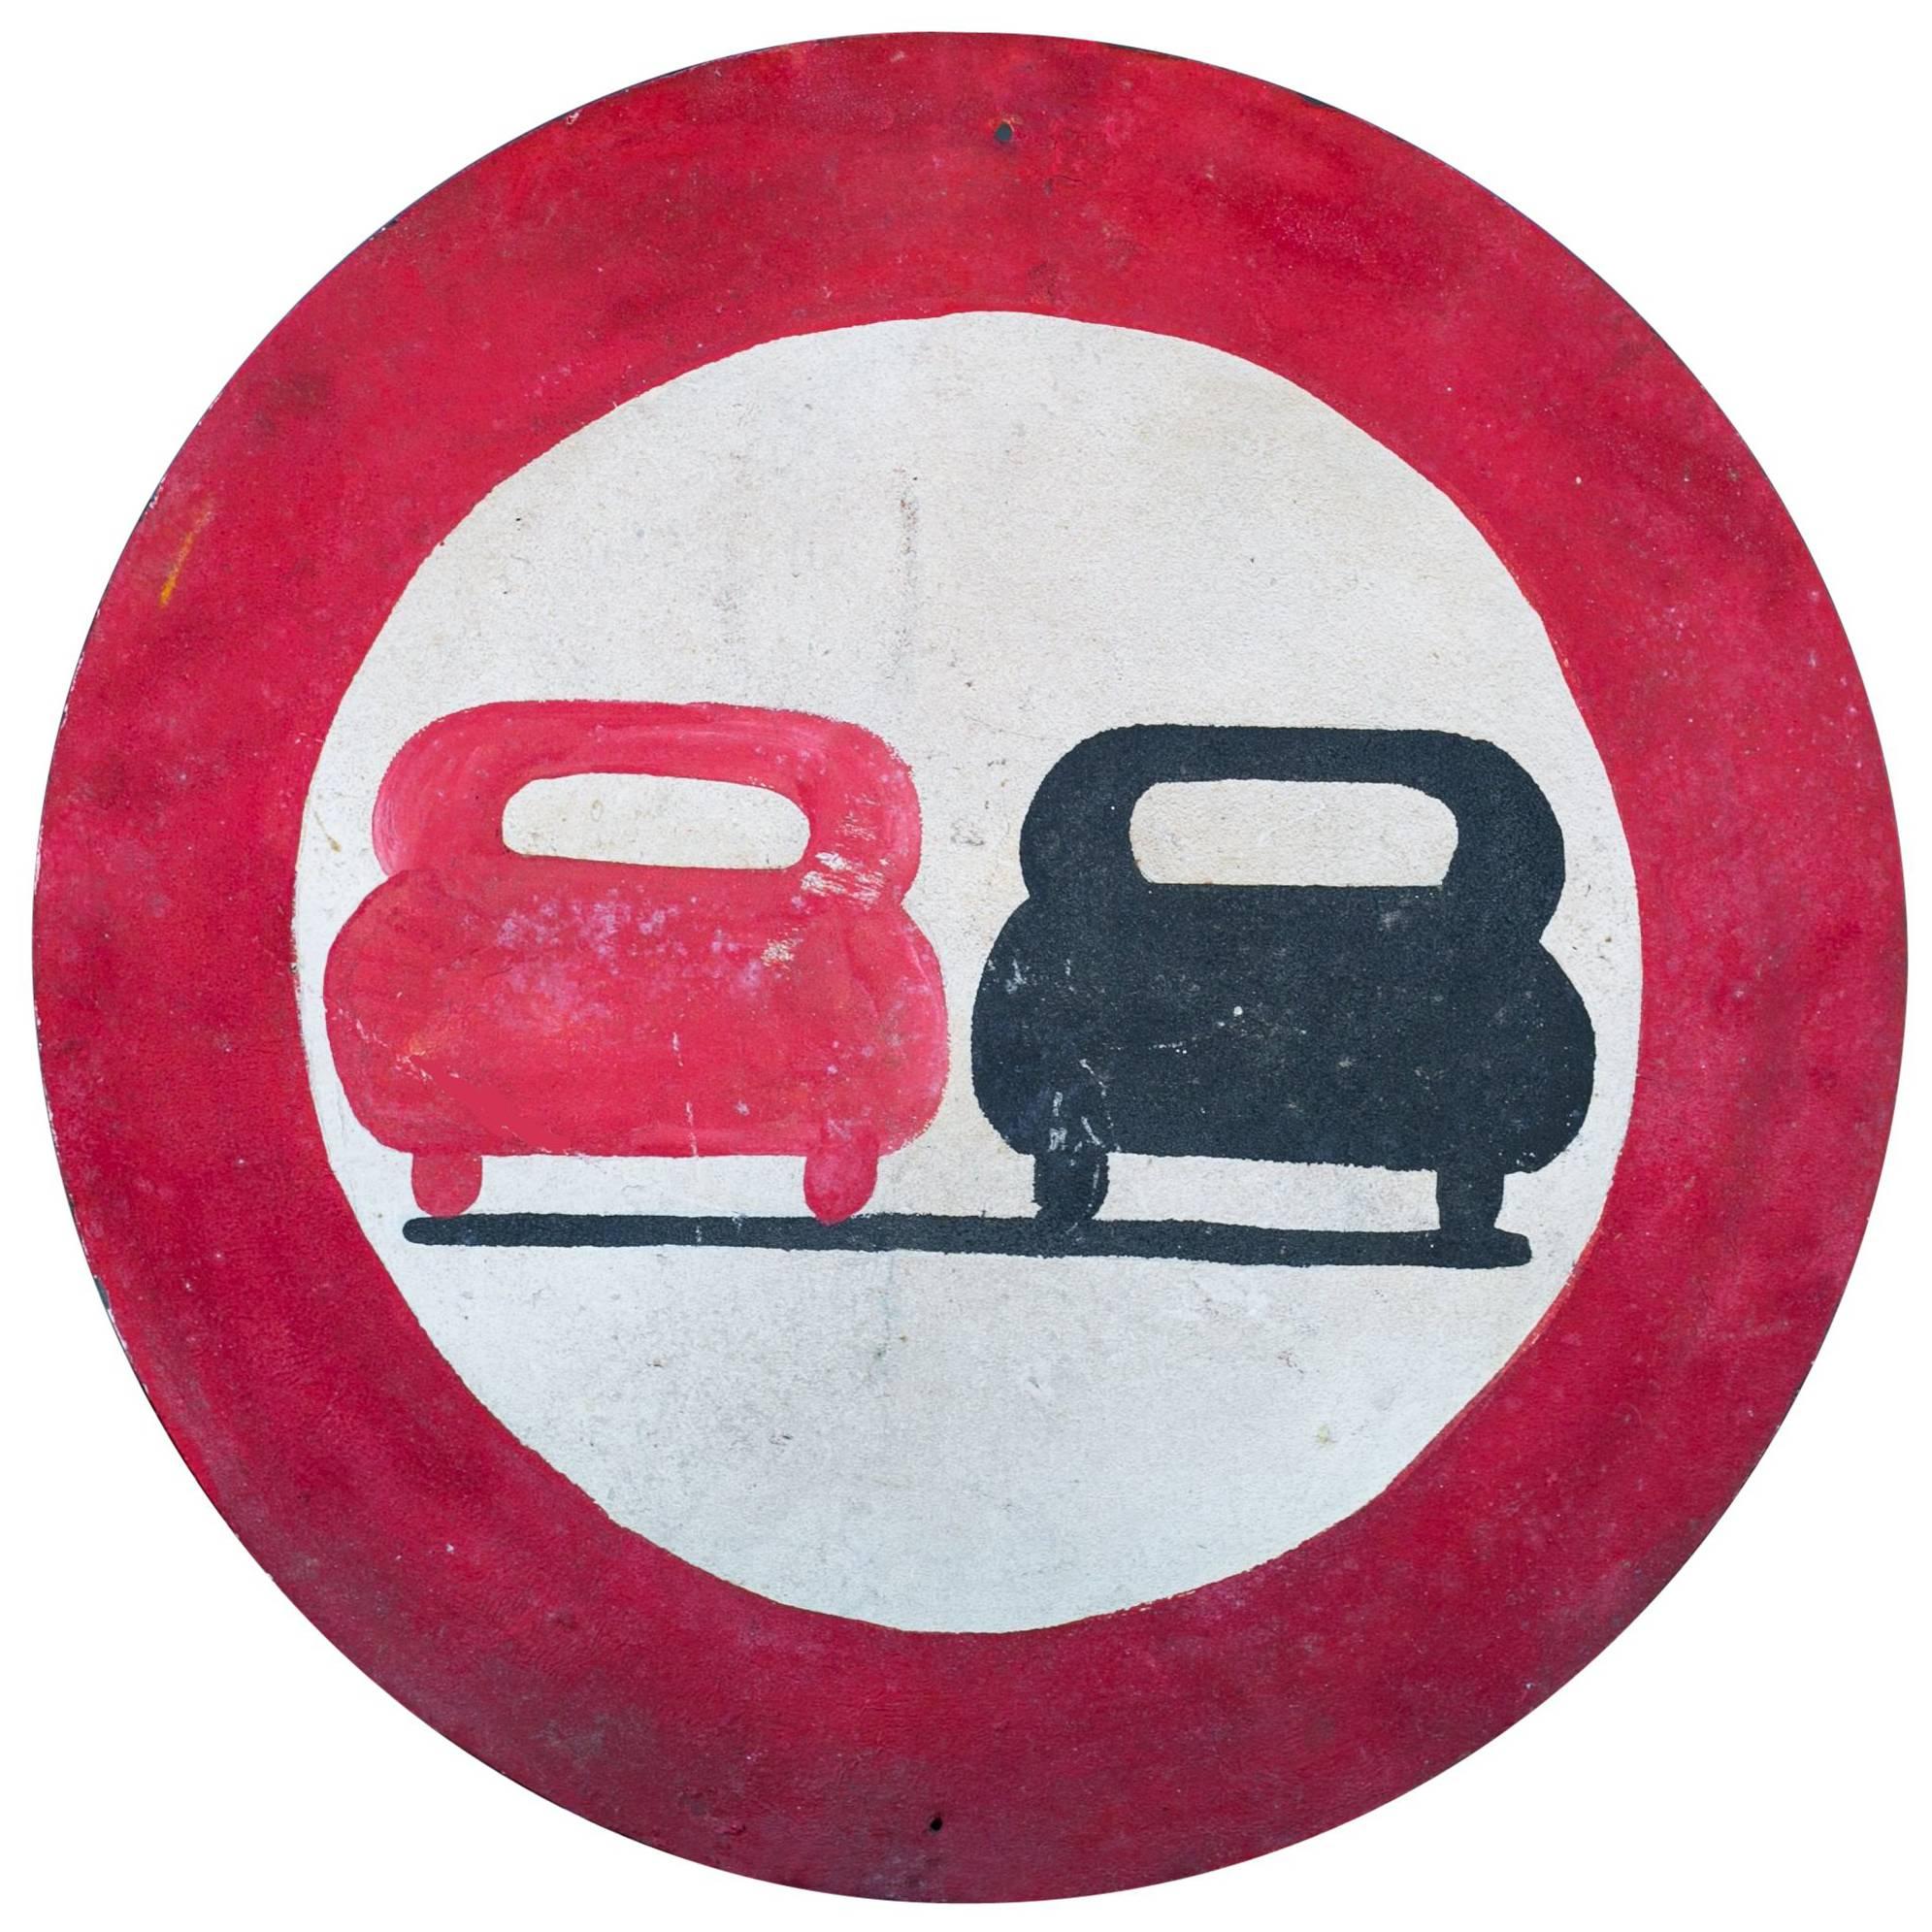 Graphic, Hand-Painted Red and Black French Metal Road Safety Sign, circa 1930